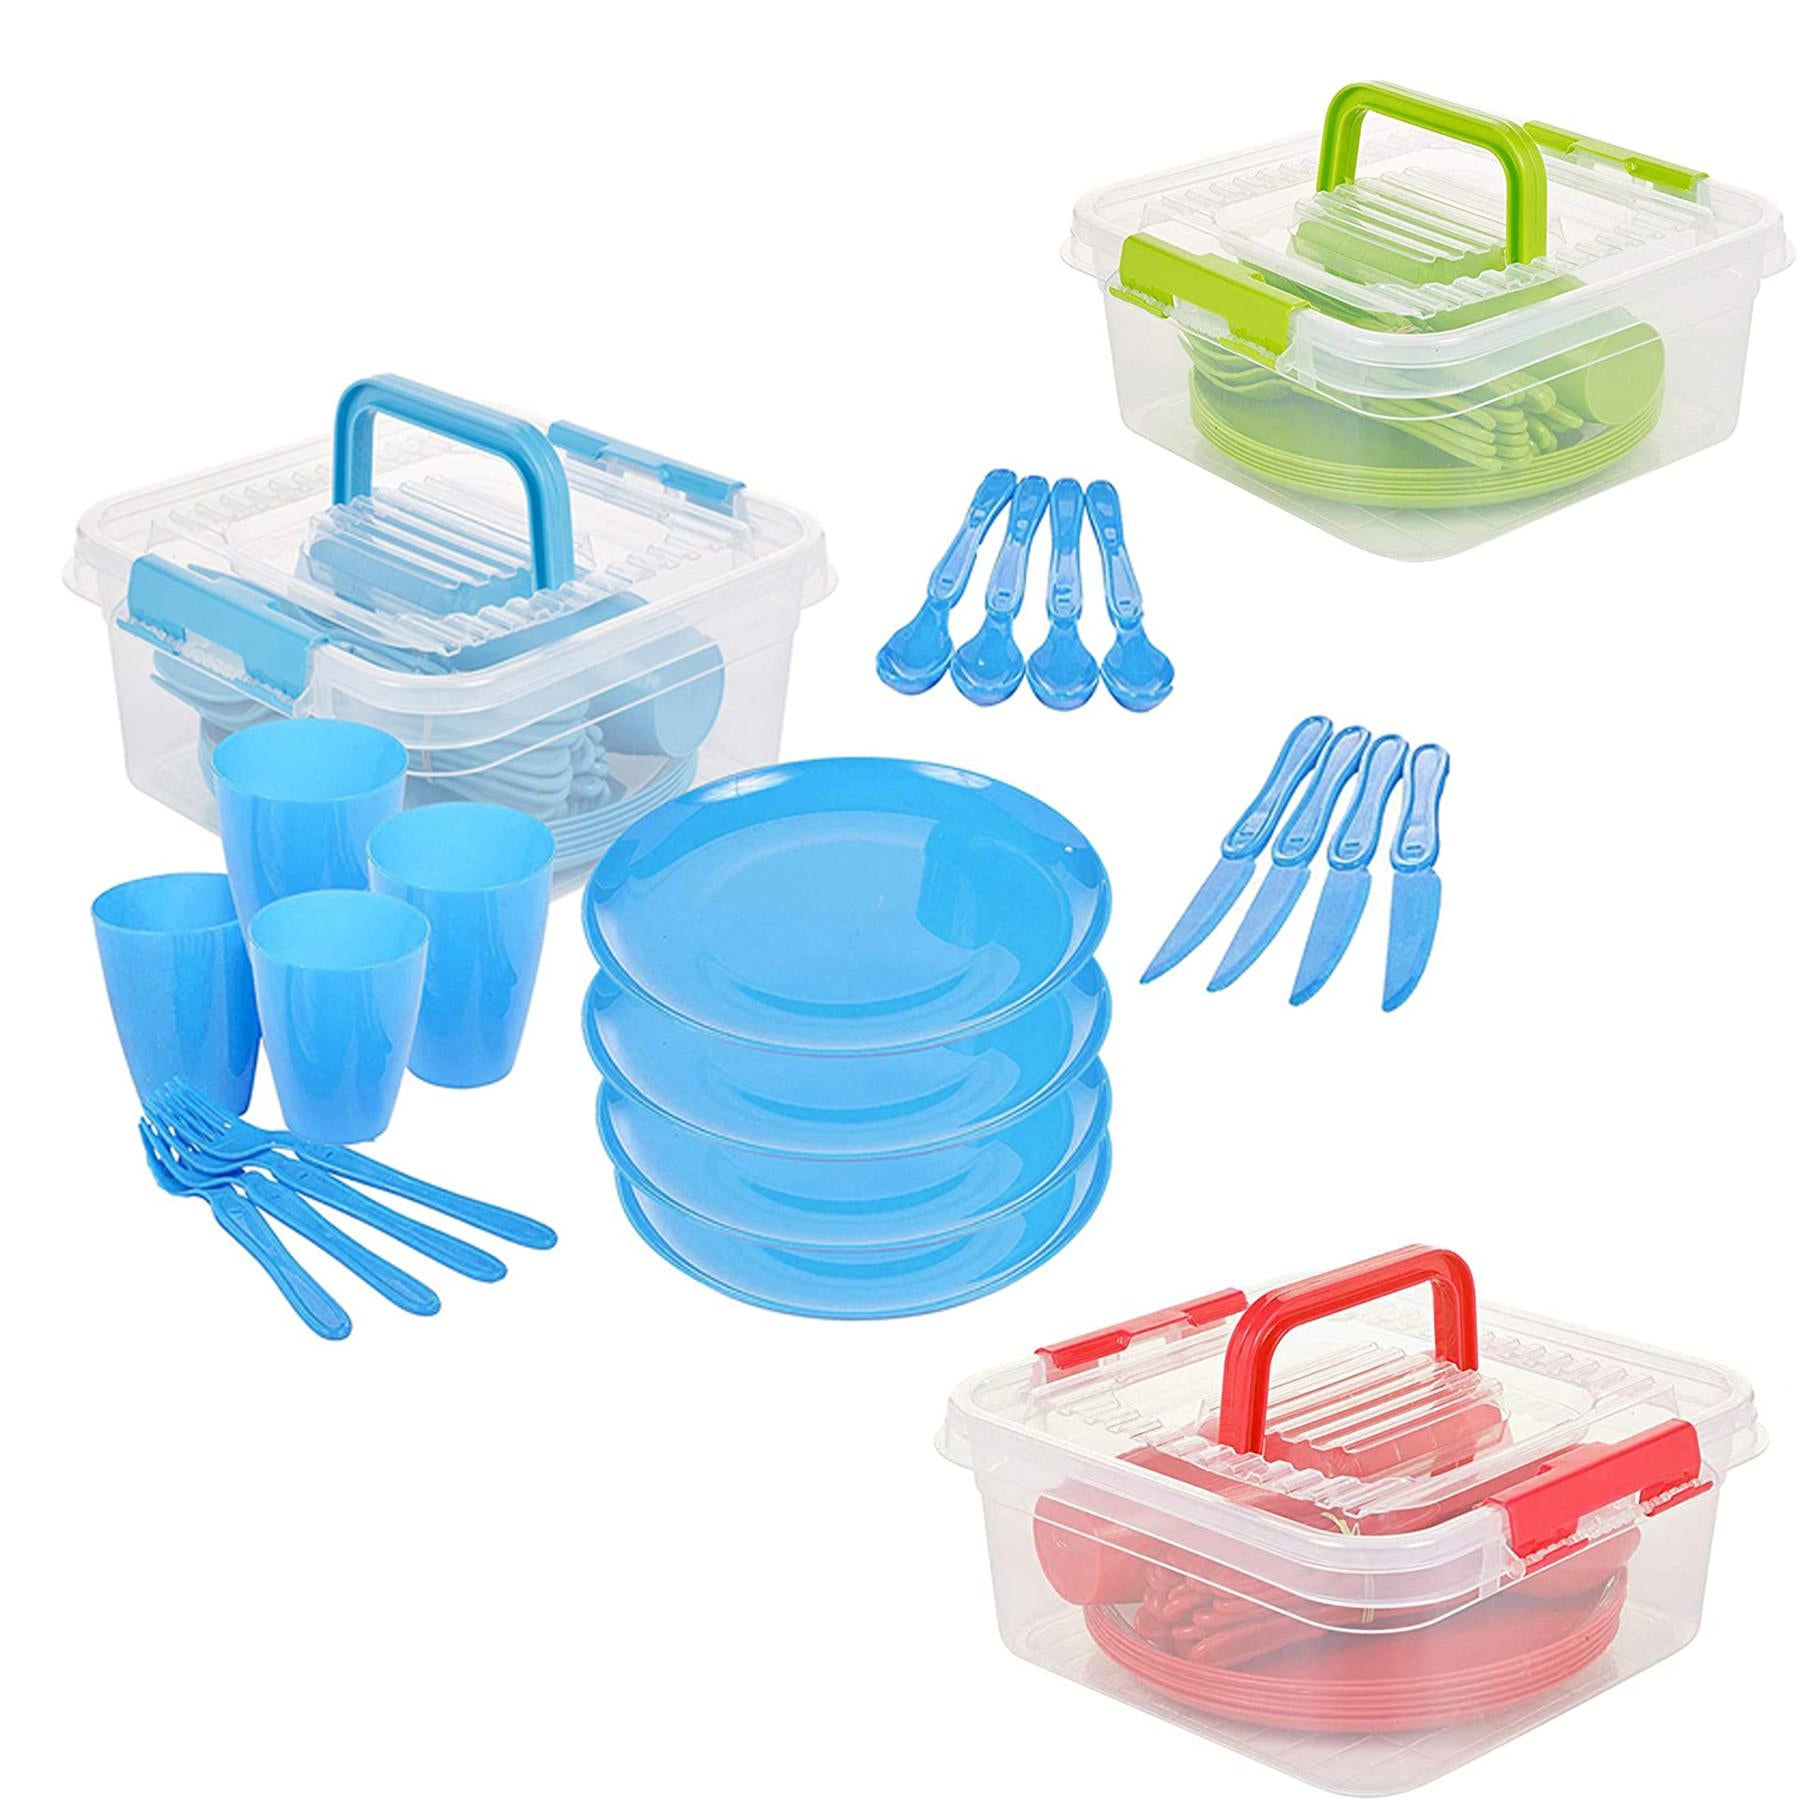 Large Picnic Set With Storage Box For Four - 21 Pieces by Geezy - UKBuyZone